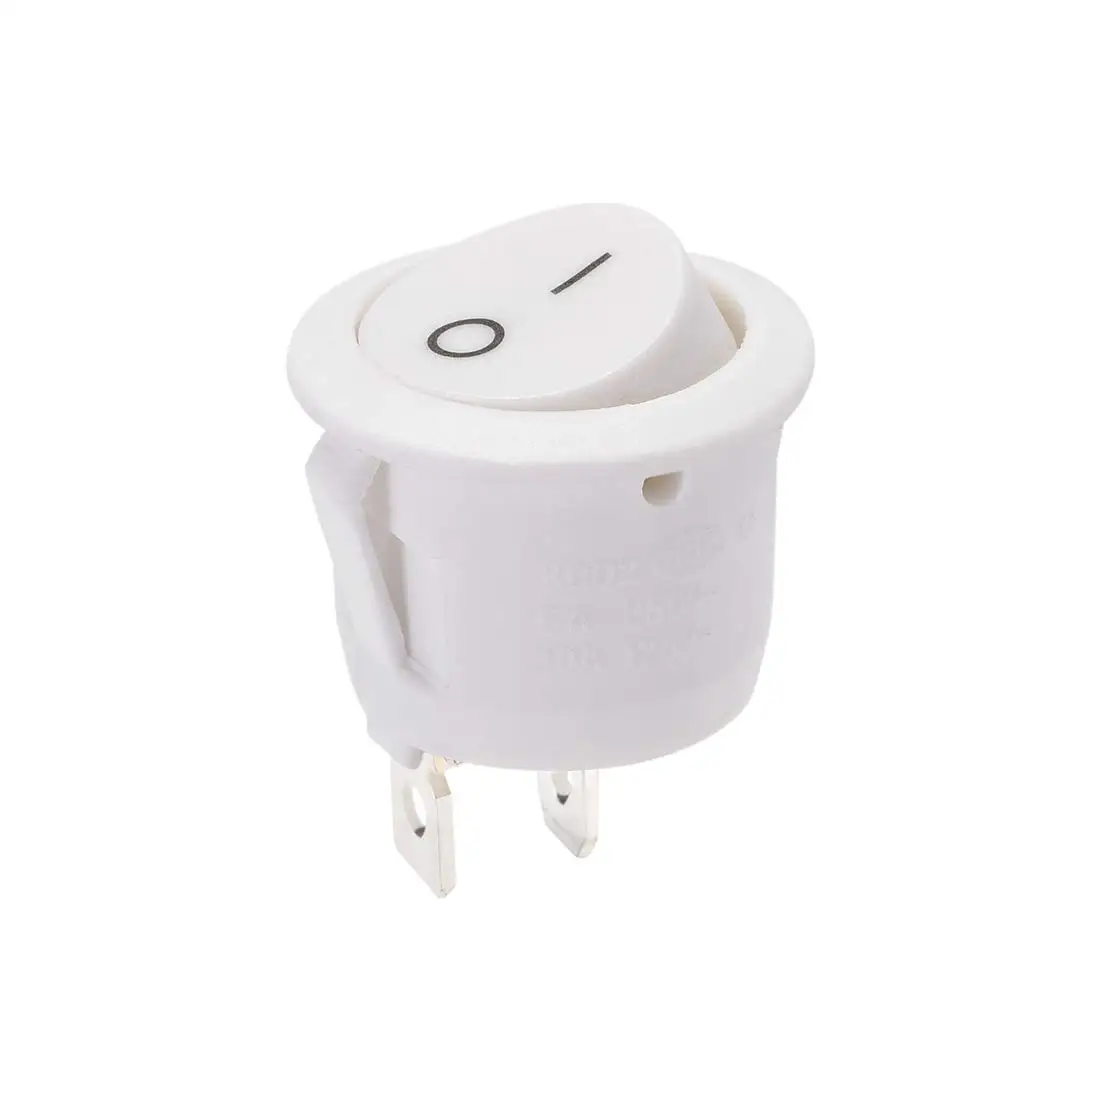 

Keszoox SPST Boat Rocker Switch Round White Toggle Switch for Boat Marine 2pins ON/Off AC250V/6A 125V/10A 1pcs